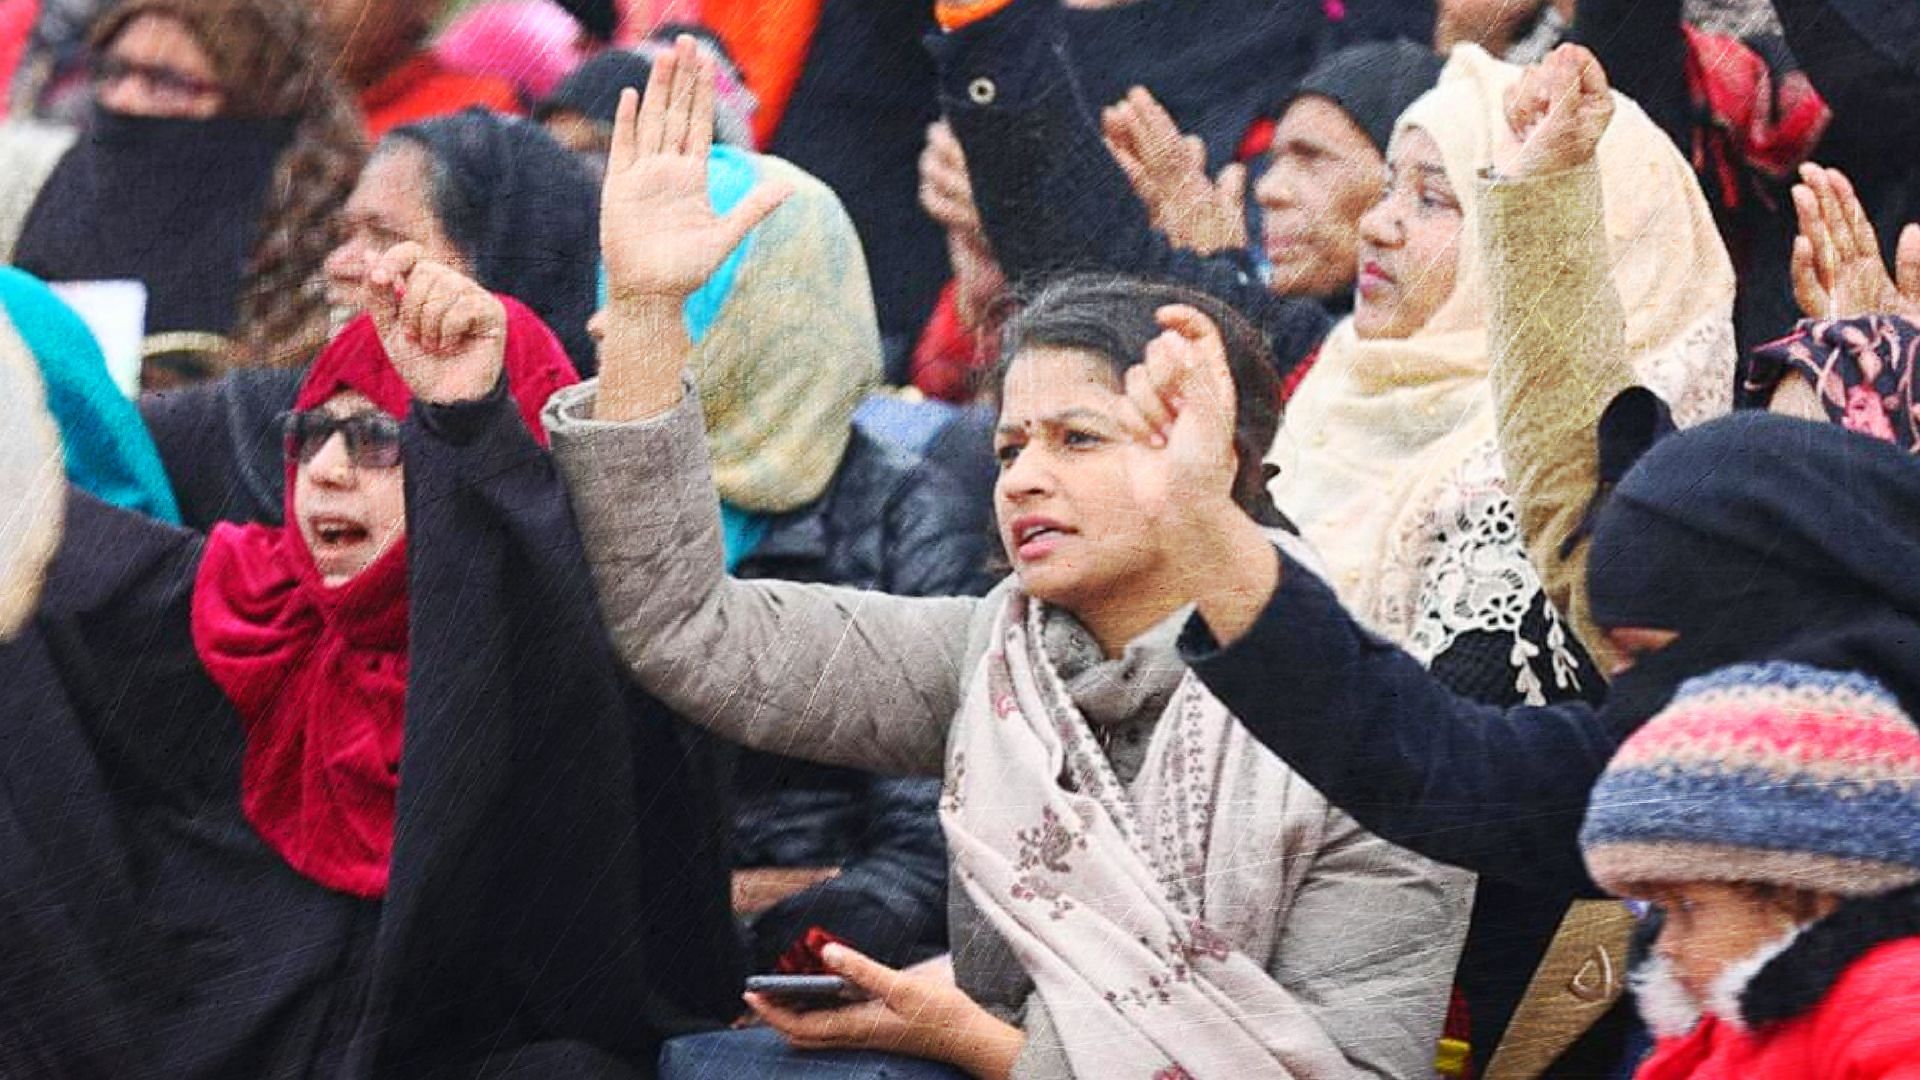 The protesters have claimed that the police seized blankets and food from the women protesting at the clock tower in Lucknow.